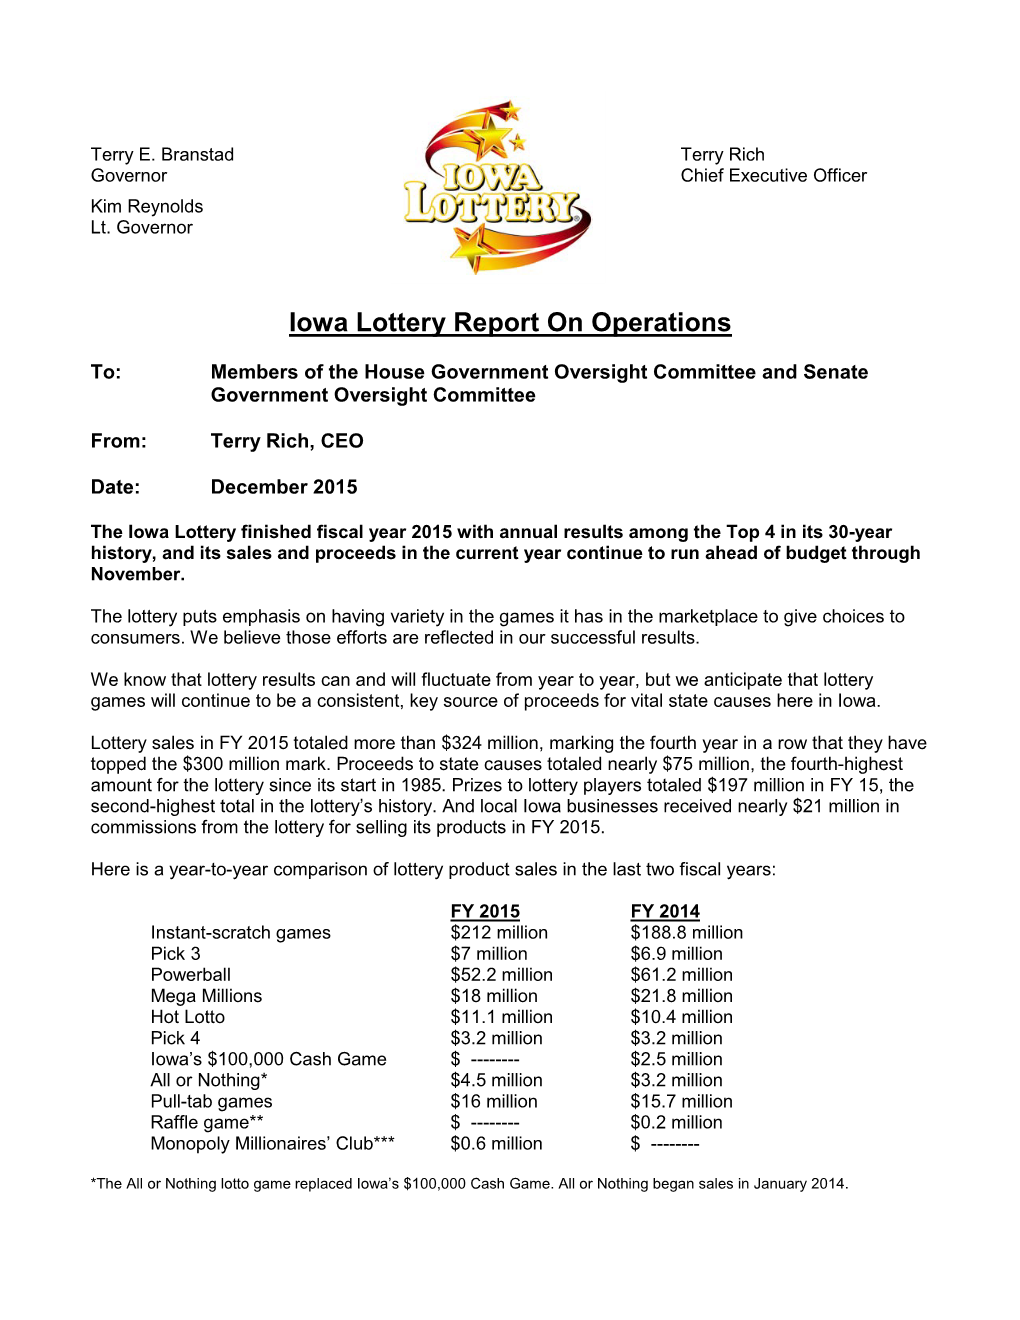 Iowa Lottery Report on Operations